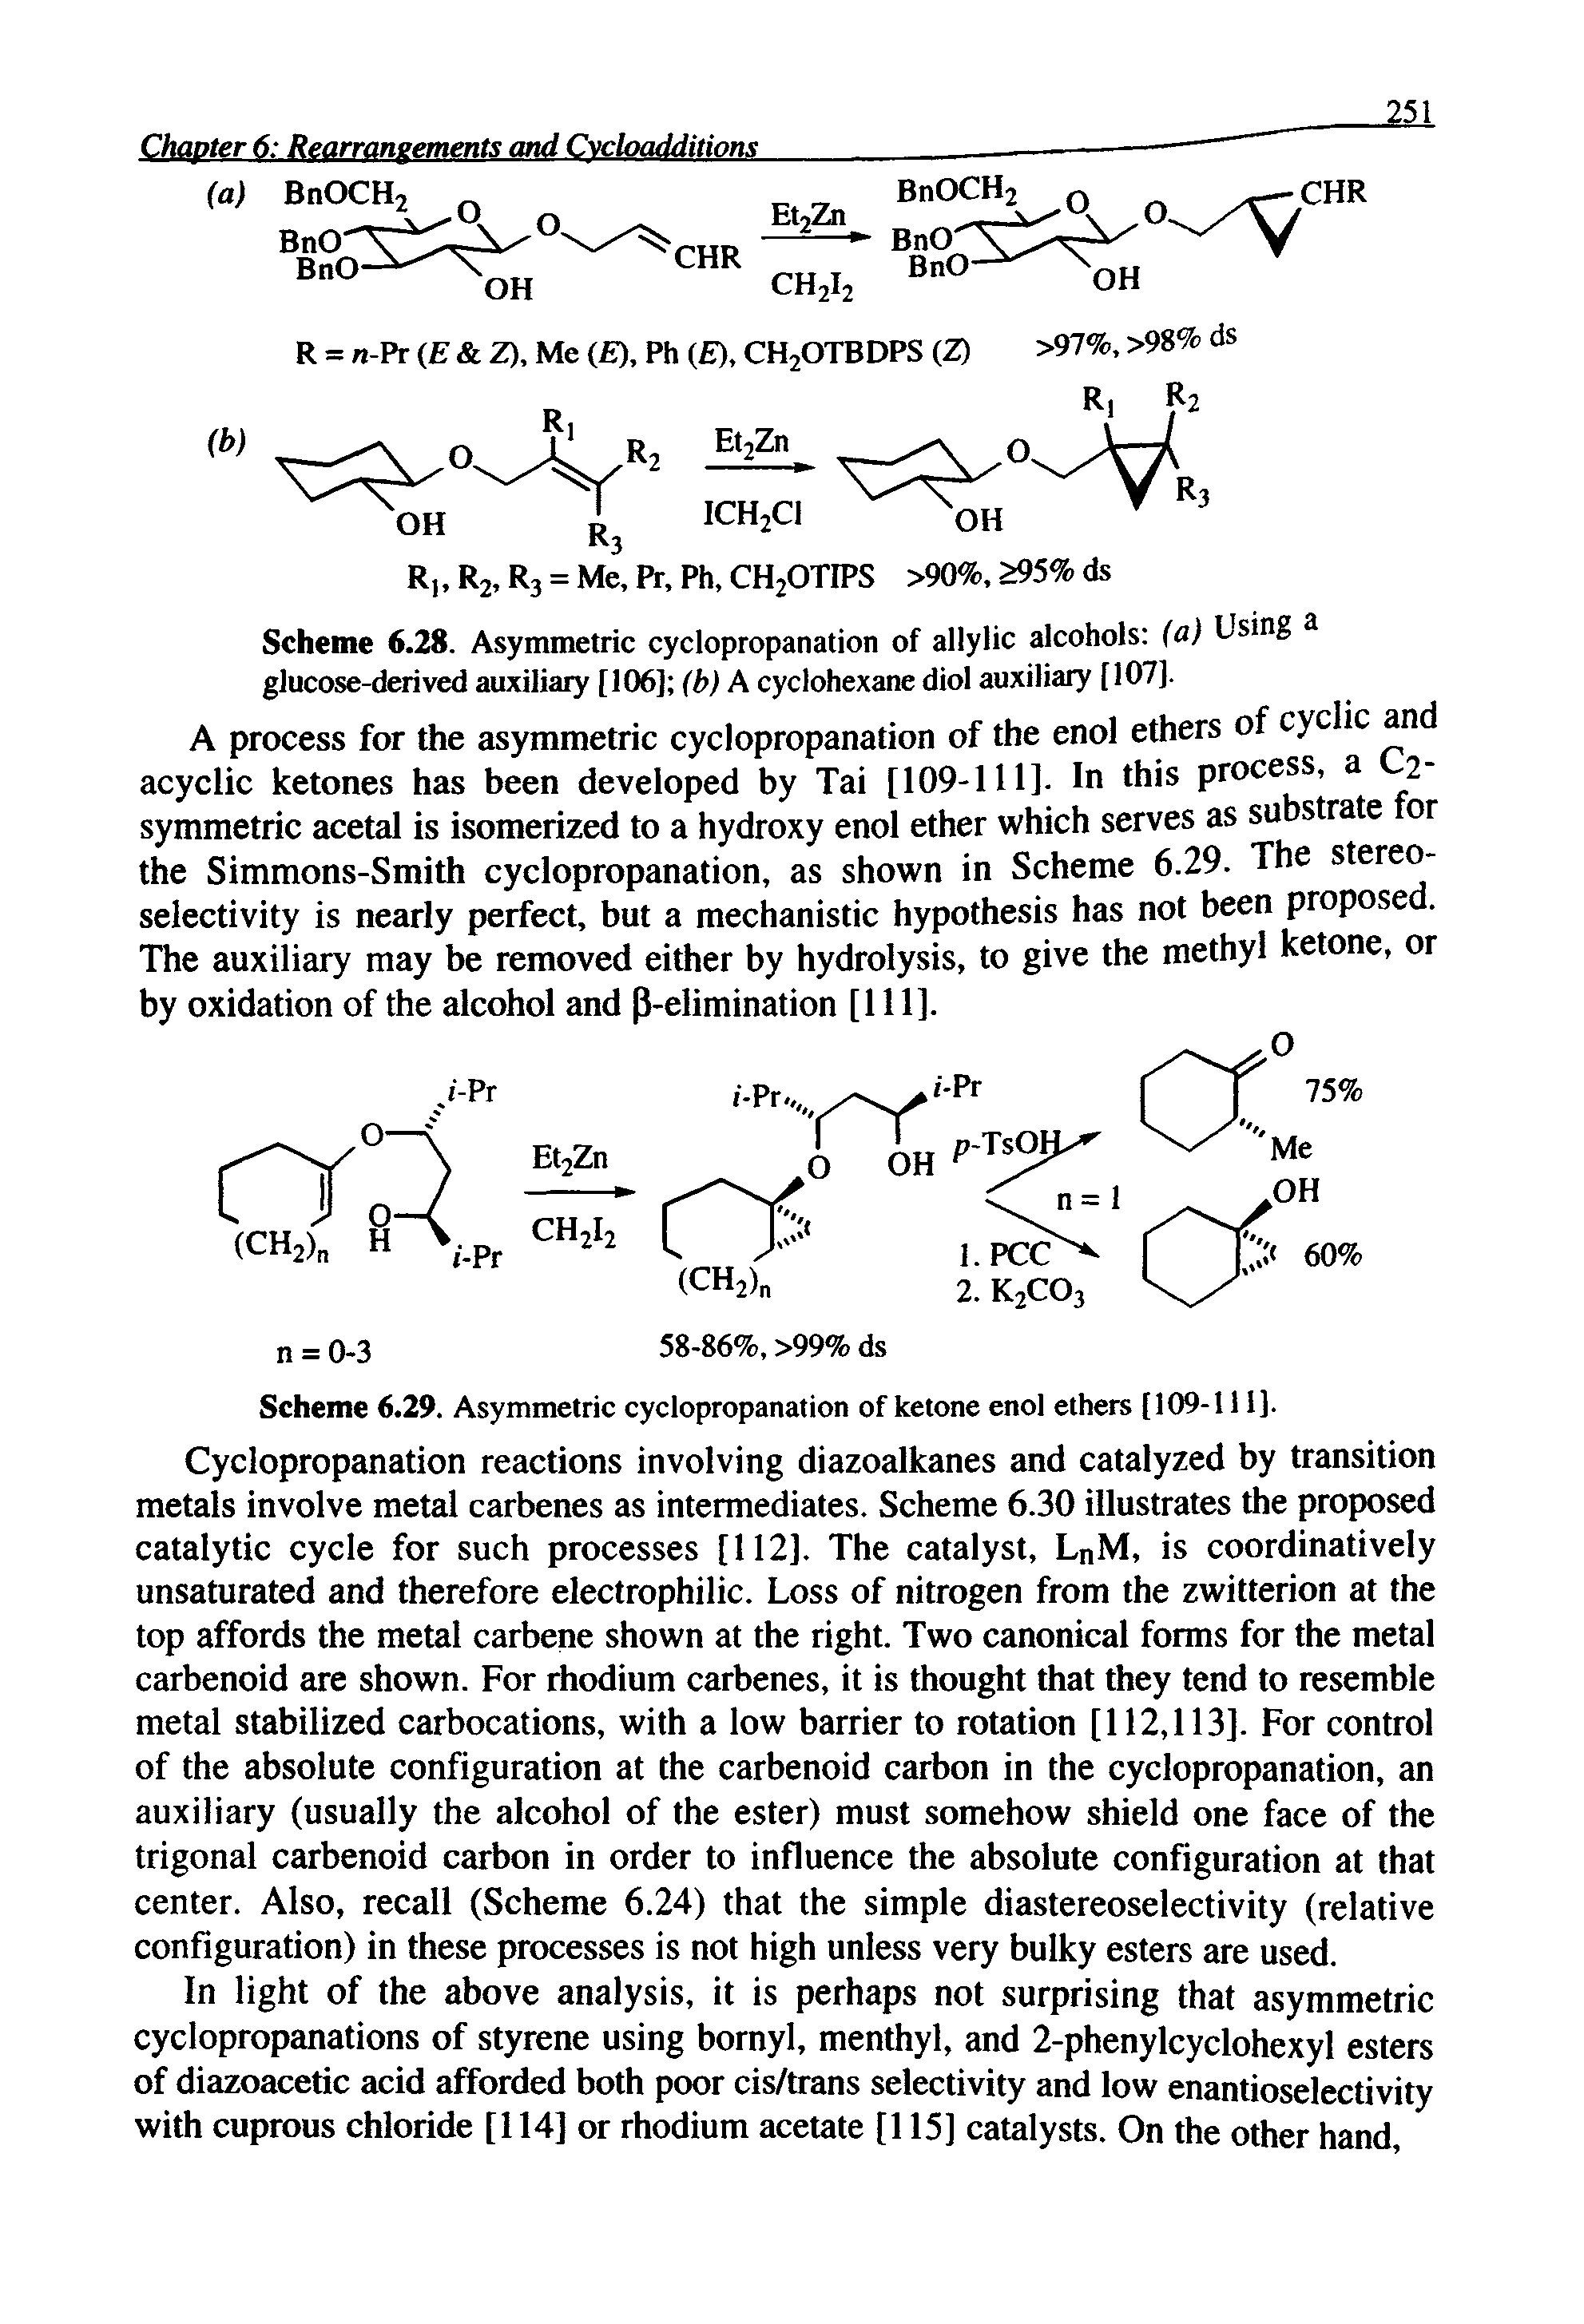 Scheme 6.28. Asymmetric cyclopropanation of allylic alcohols (a) Using a glucose-derived auxiliary [106] (b) A cyclohexane diol auxiliary [107].